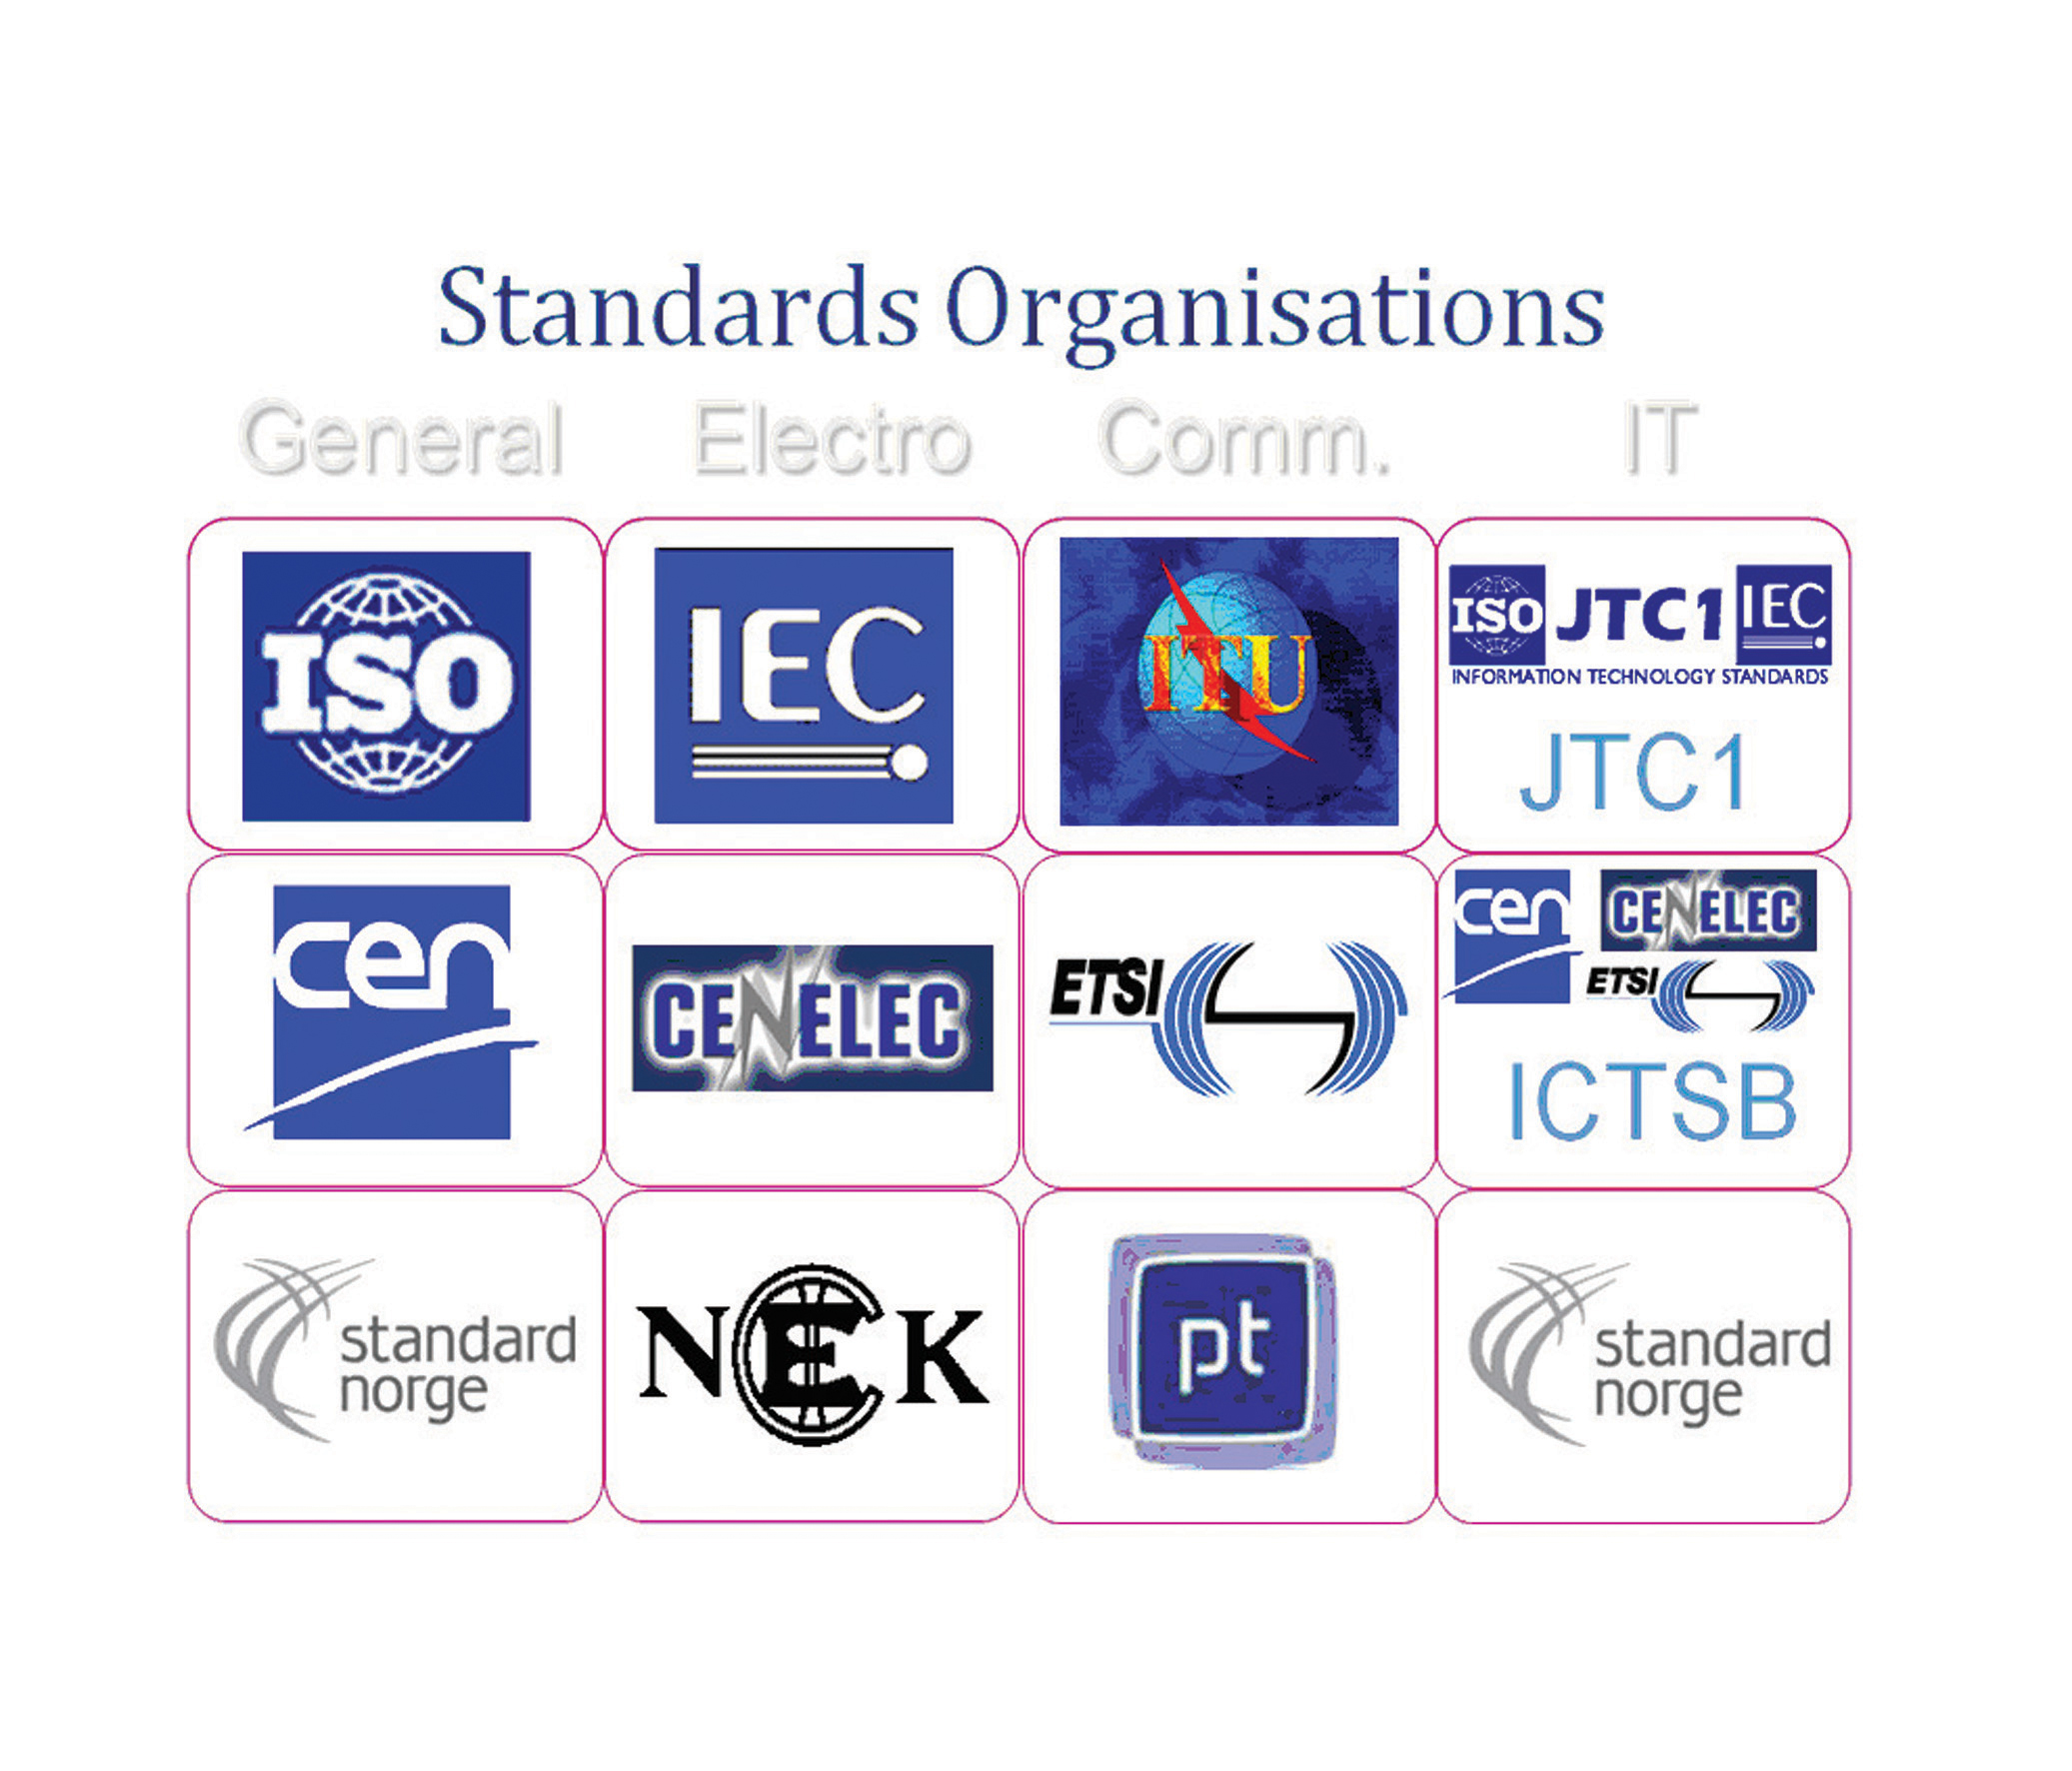 Standards organisations involved in the cooperative infrastructure definition process.